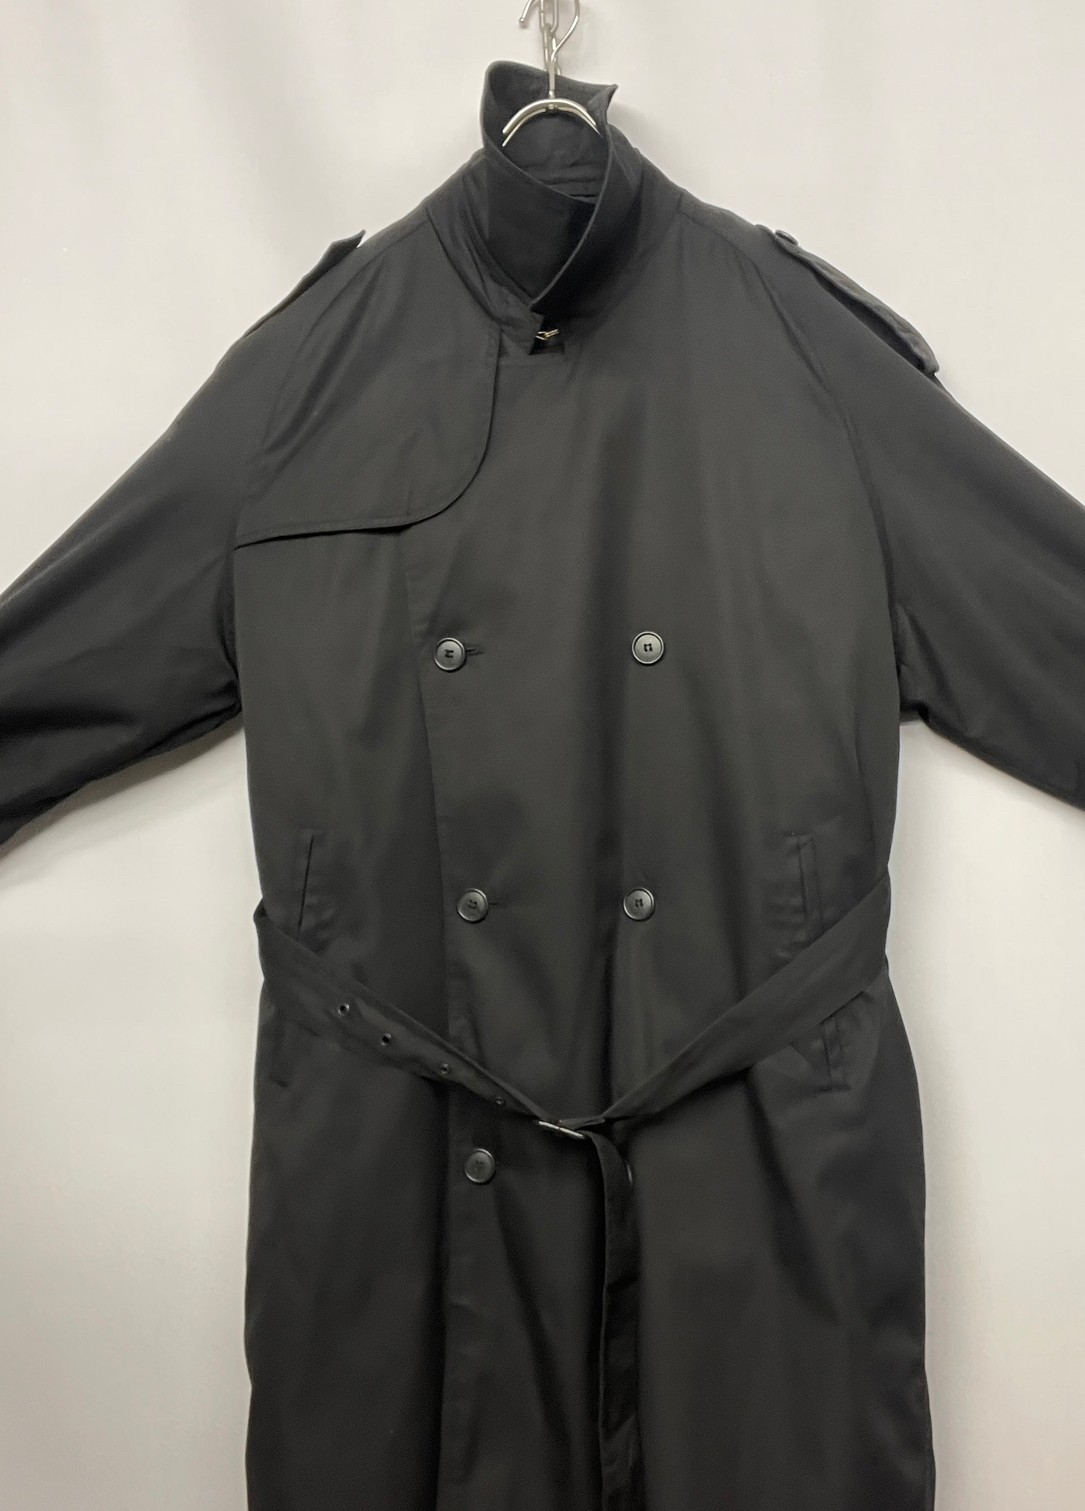 “pierre cardin” Trench Coat with Liner